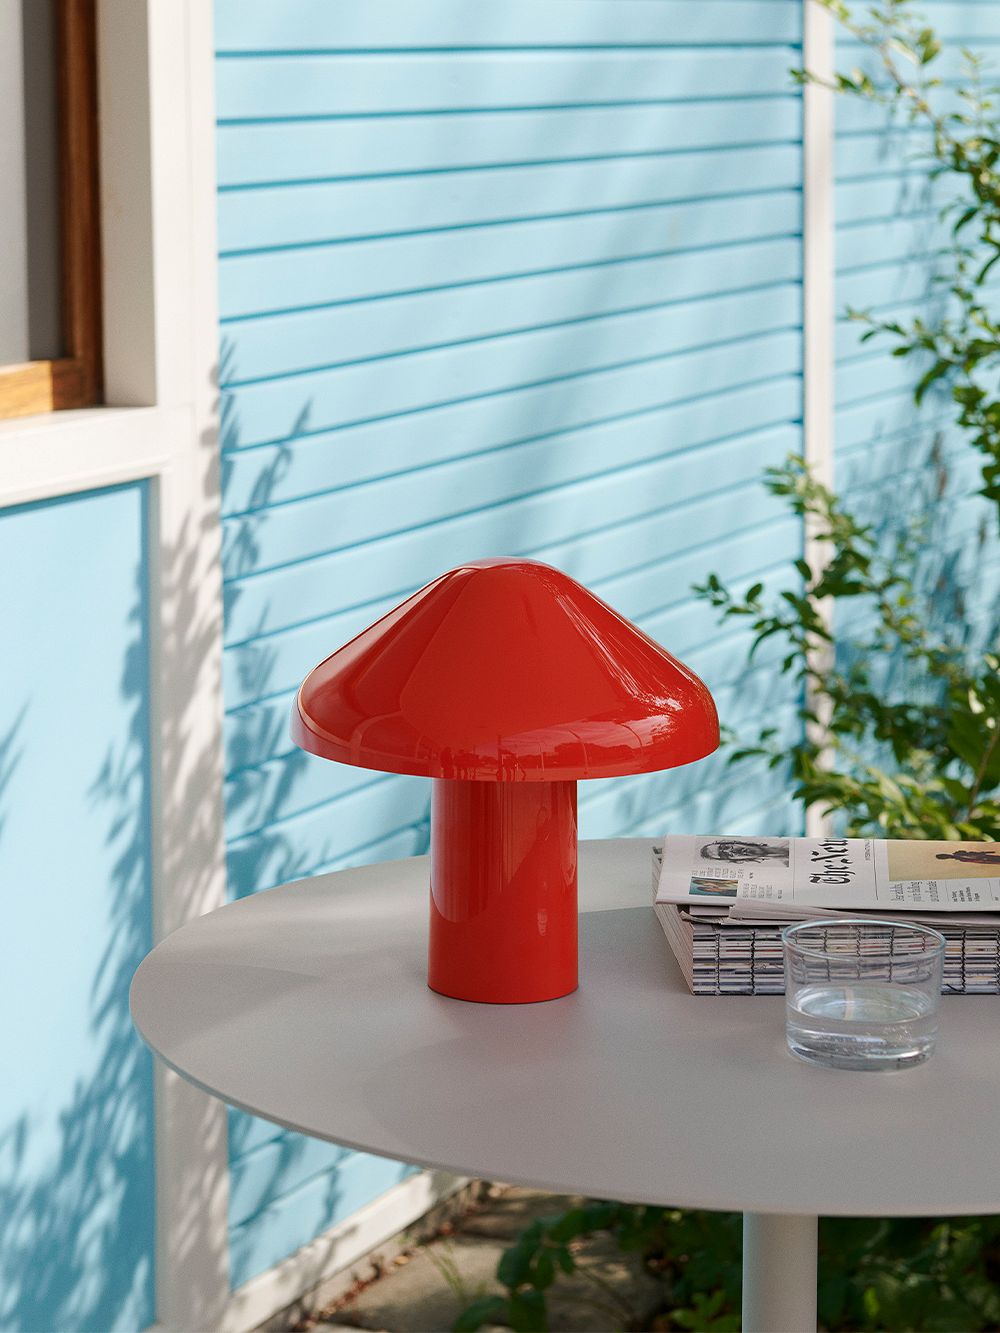 The red Pao Portable lamp on a table outdoors in the sunshine, with a light blue wall in the background.